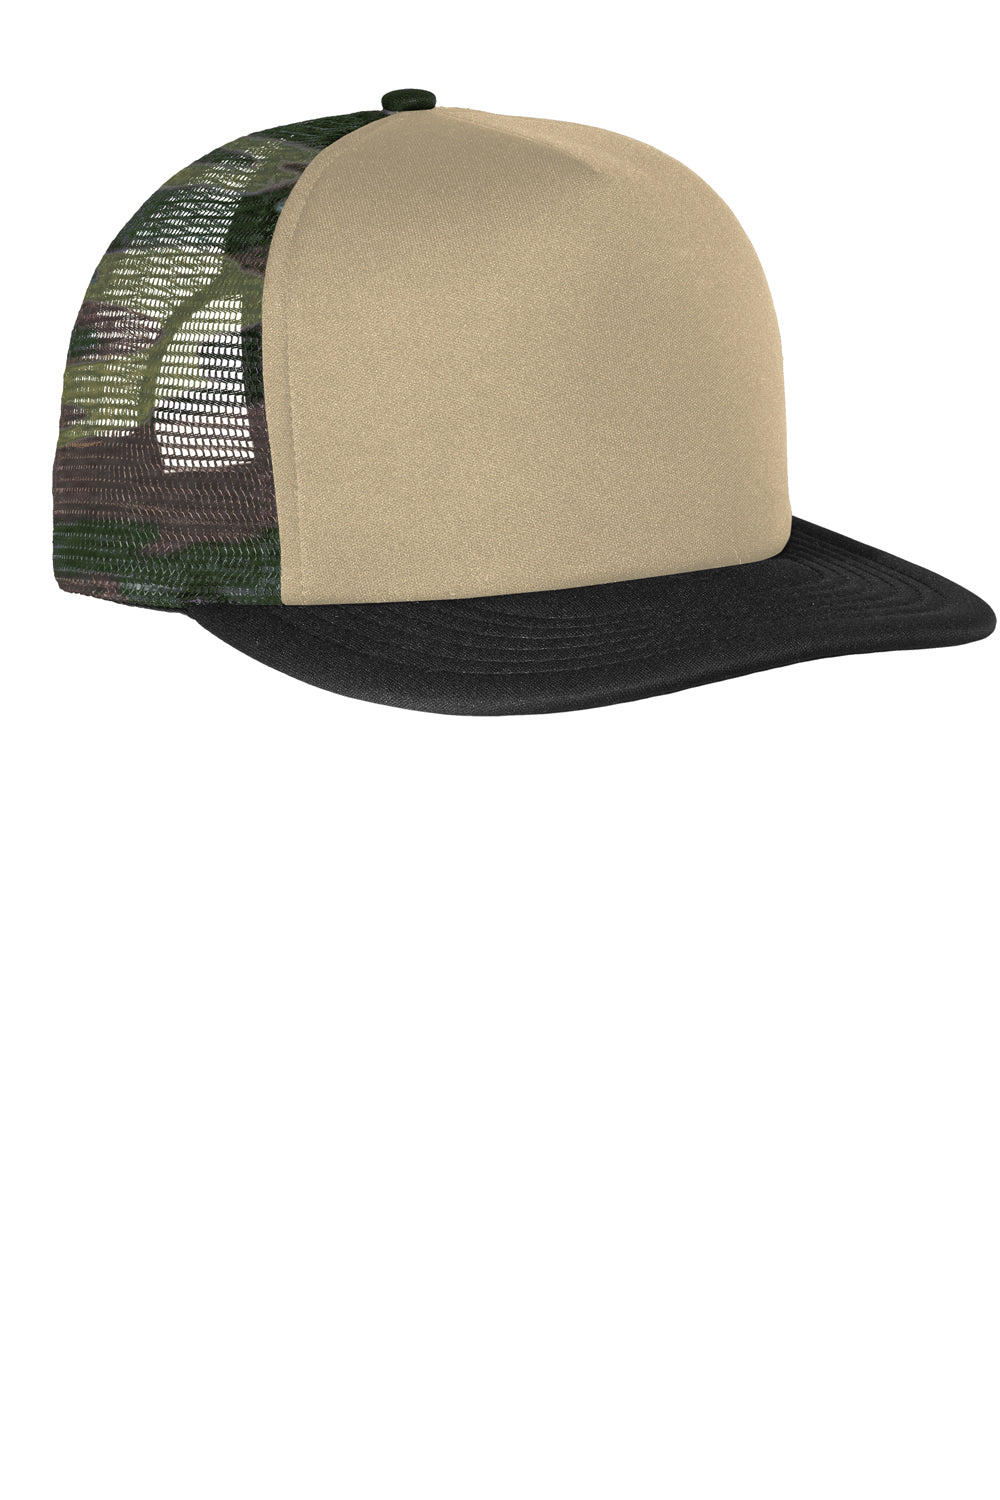 District DT624 Flat Bill Snapback Trucker Hat Military Camo Front